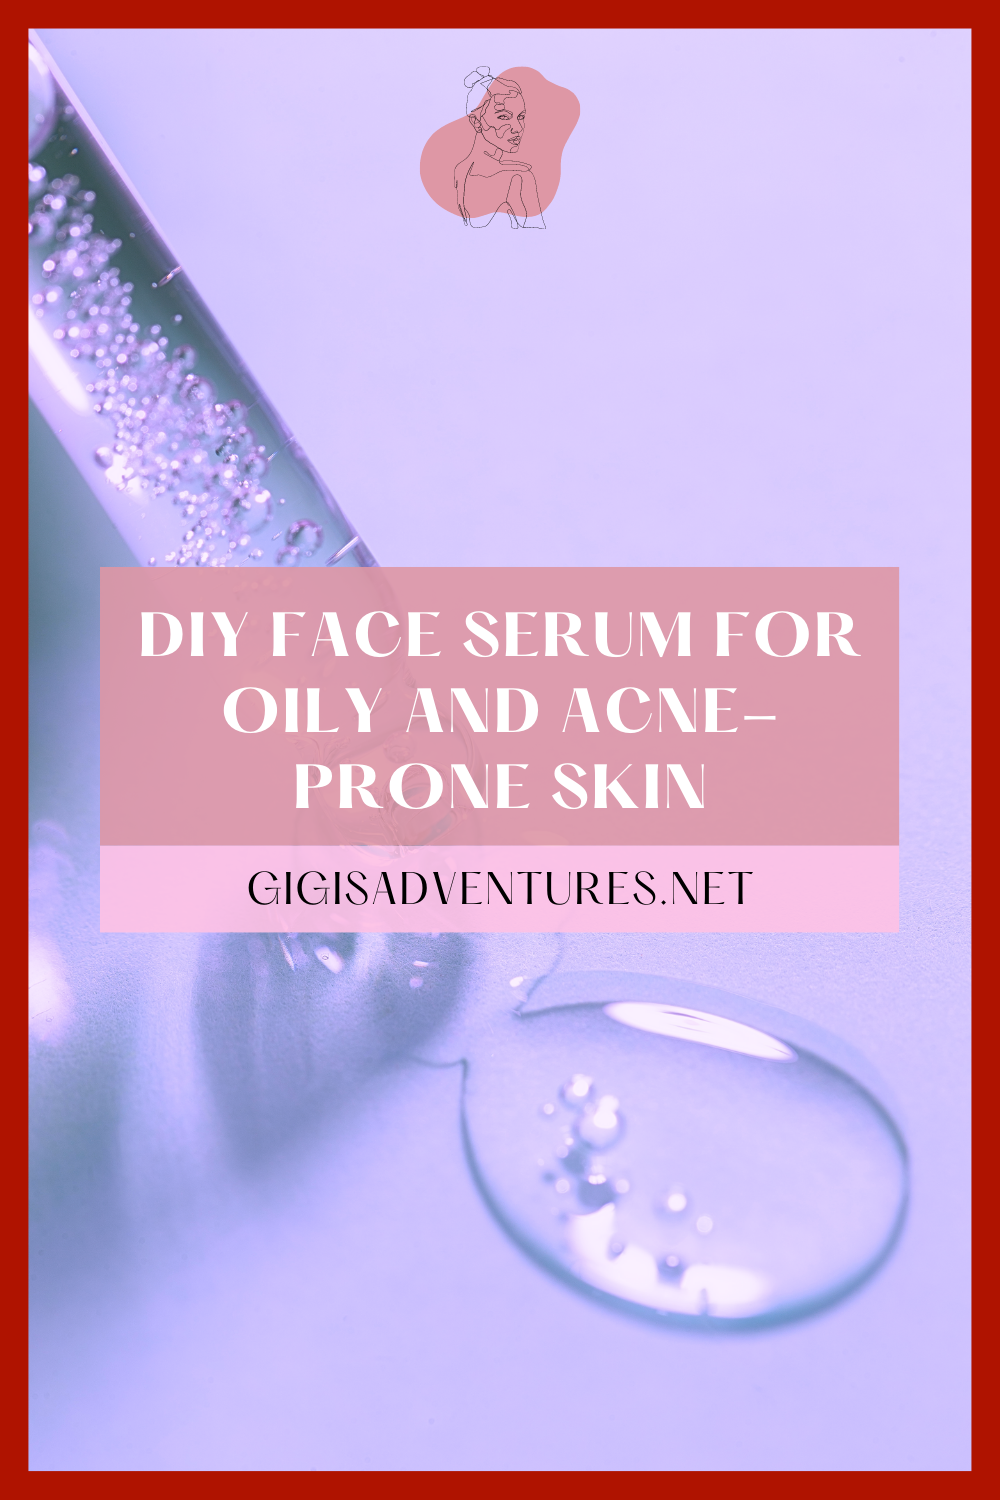 DIY Face Serum for Oily and Acne-Prone Skin | DIY Face Serum